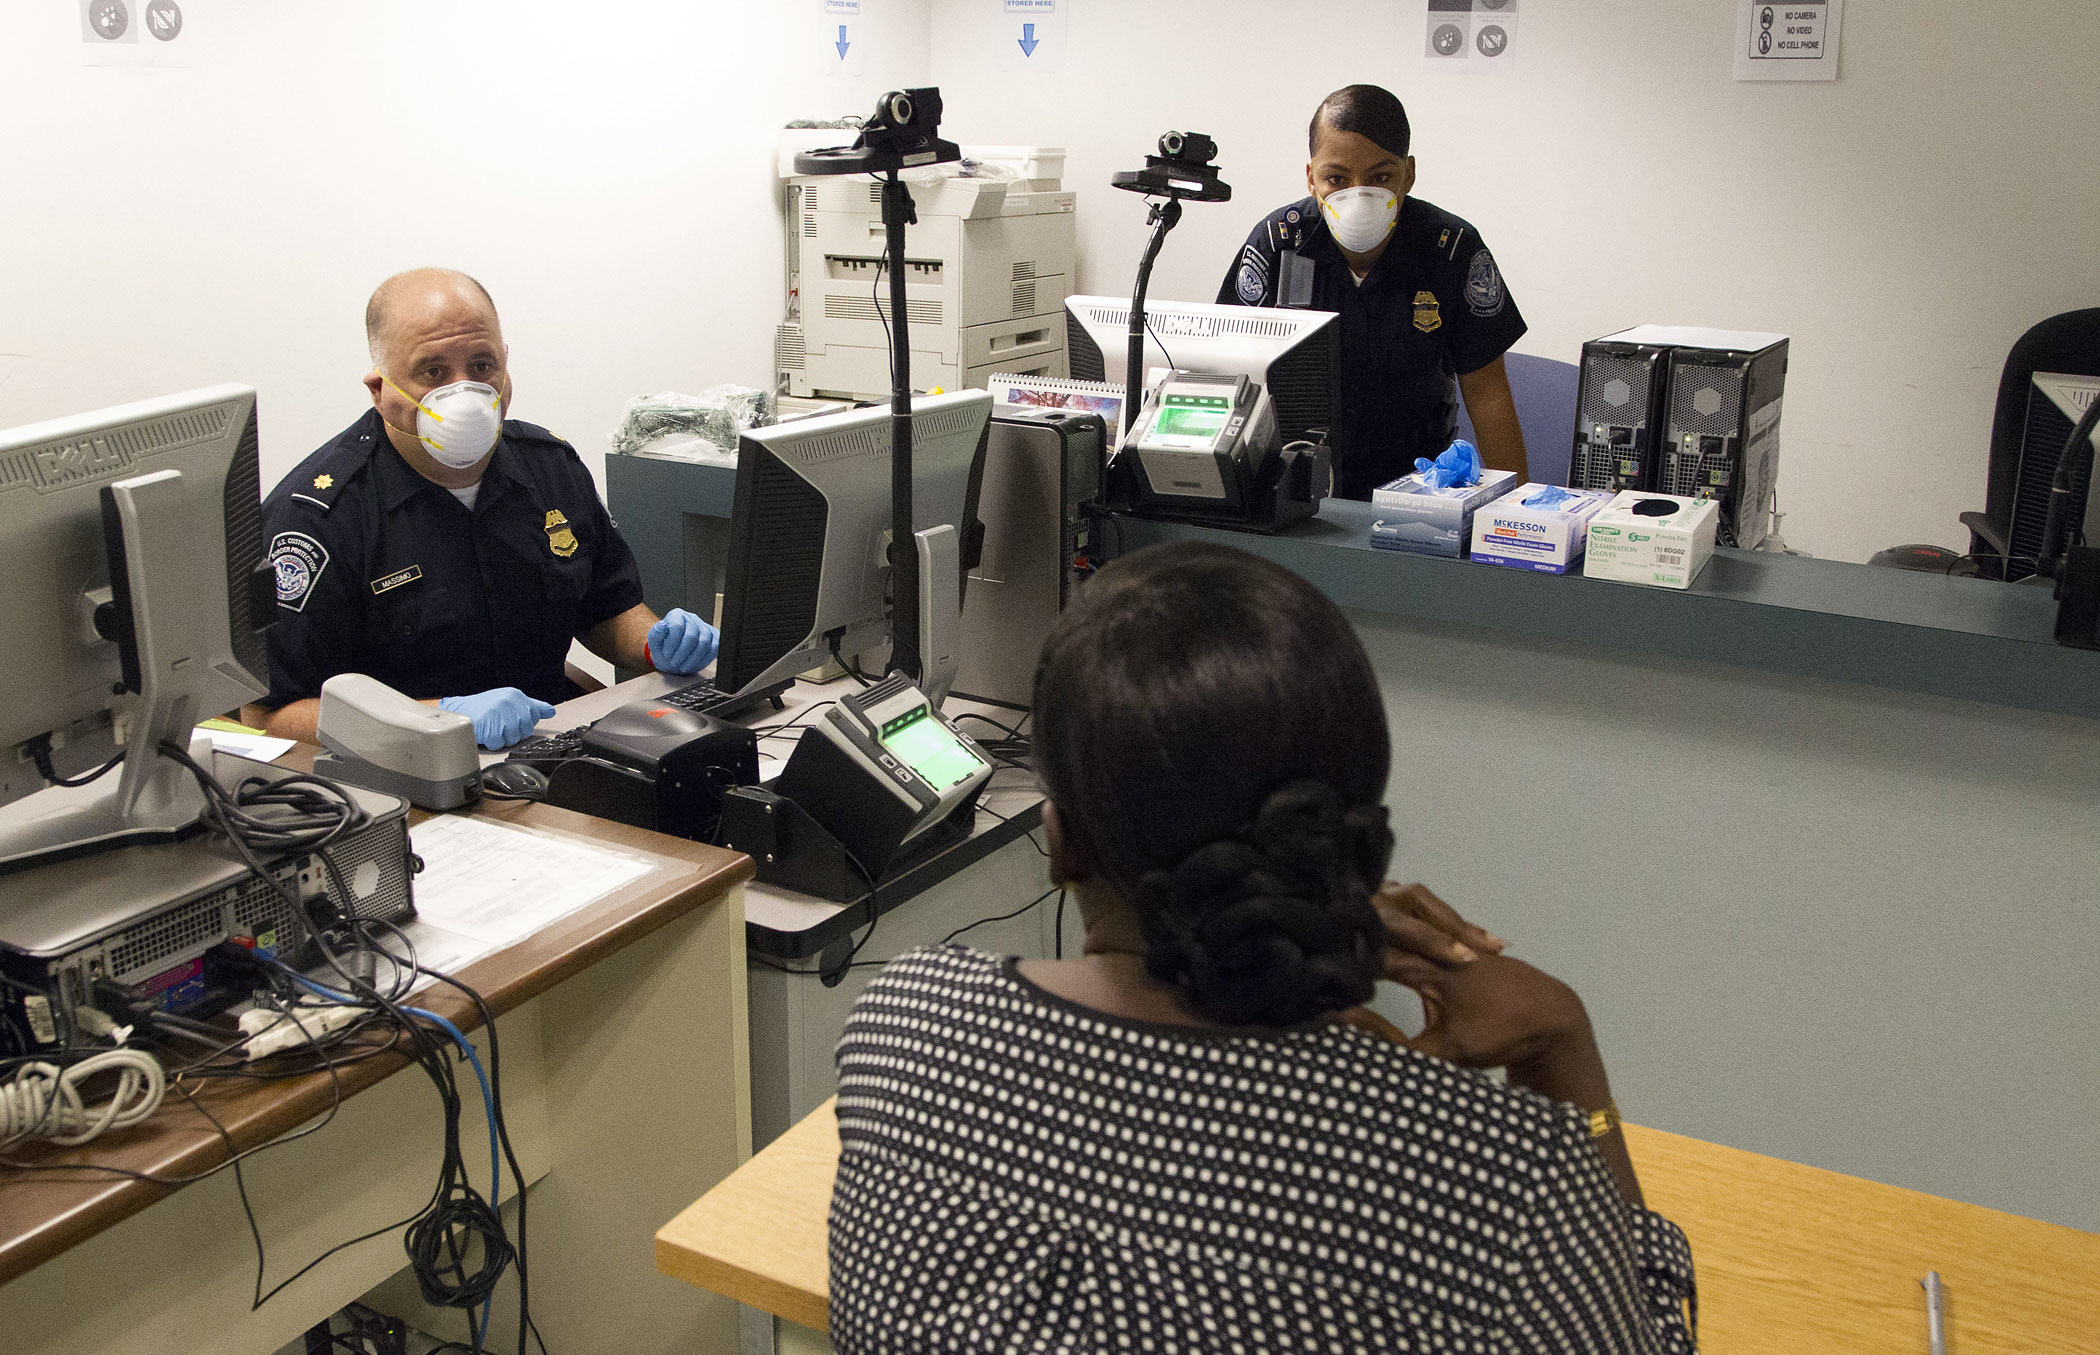 IINTERNATIONAL PASSENGERS BEING SCREENED FOR MEDICAL CONDITIONS RELATED TO EBOLA AT  THE CHICAGO INTERNATIONAL AIRPORT BY MEMBERS OF THE US CUSTOMS AND BOARDER PATROL AND A US COAST GUARD MEDICAL TEAM, BOTH PART OF THE US DEPARTMENT HOMELAND SECURITY. THE